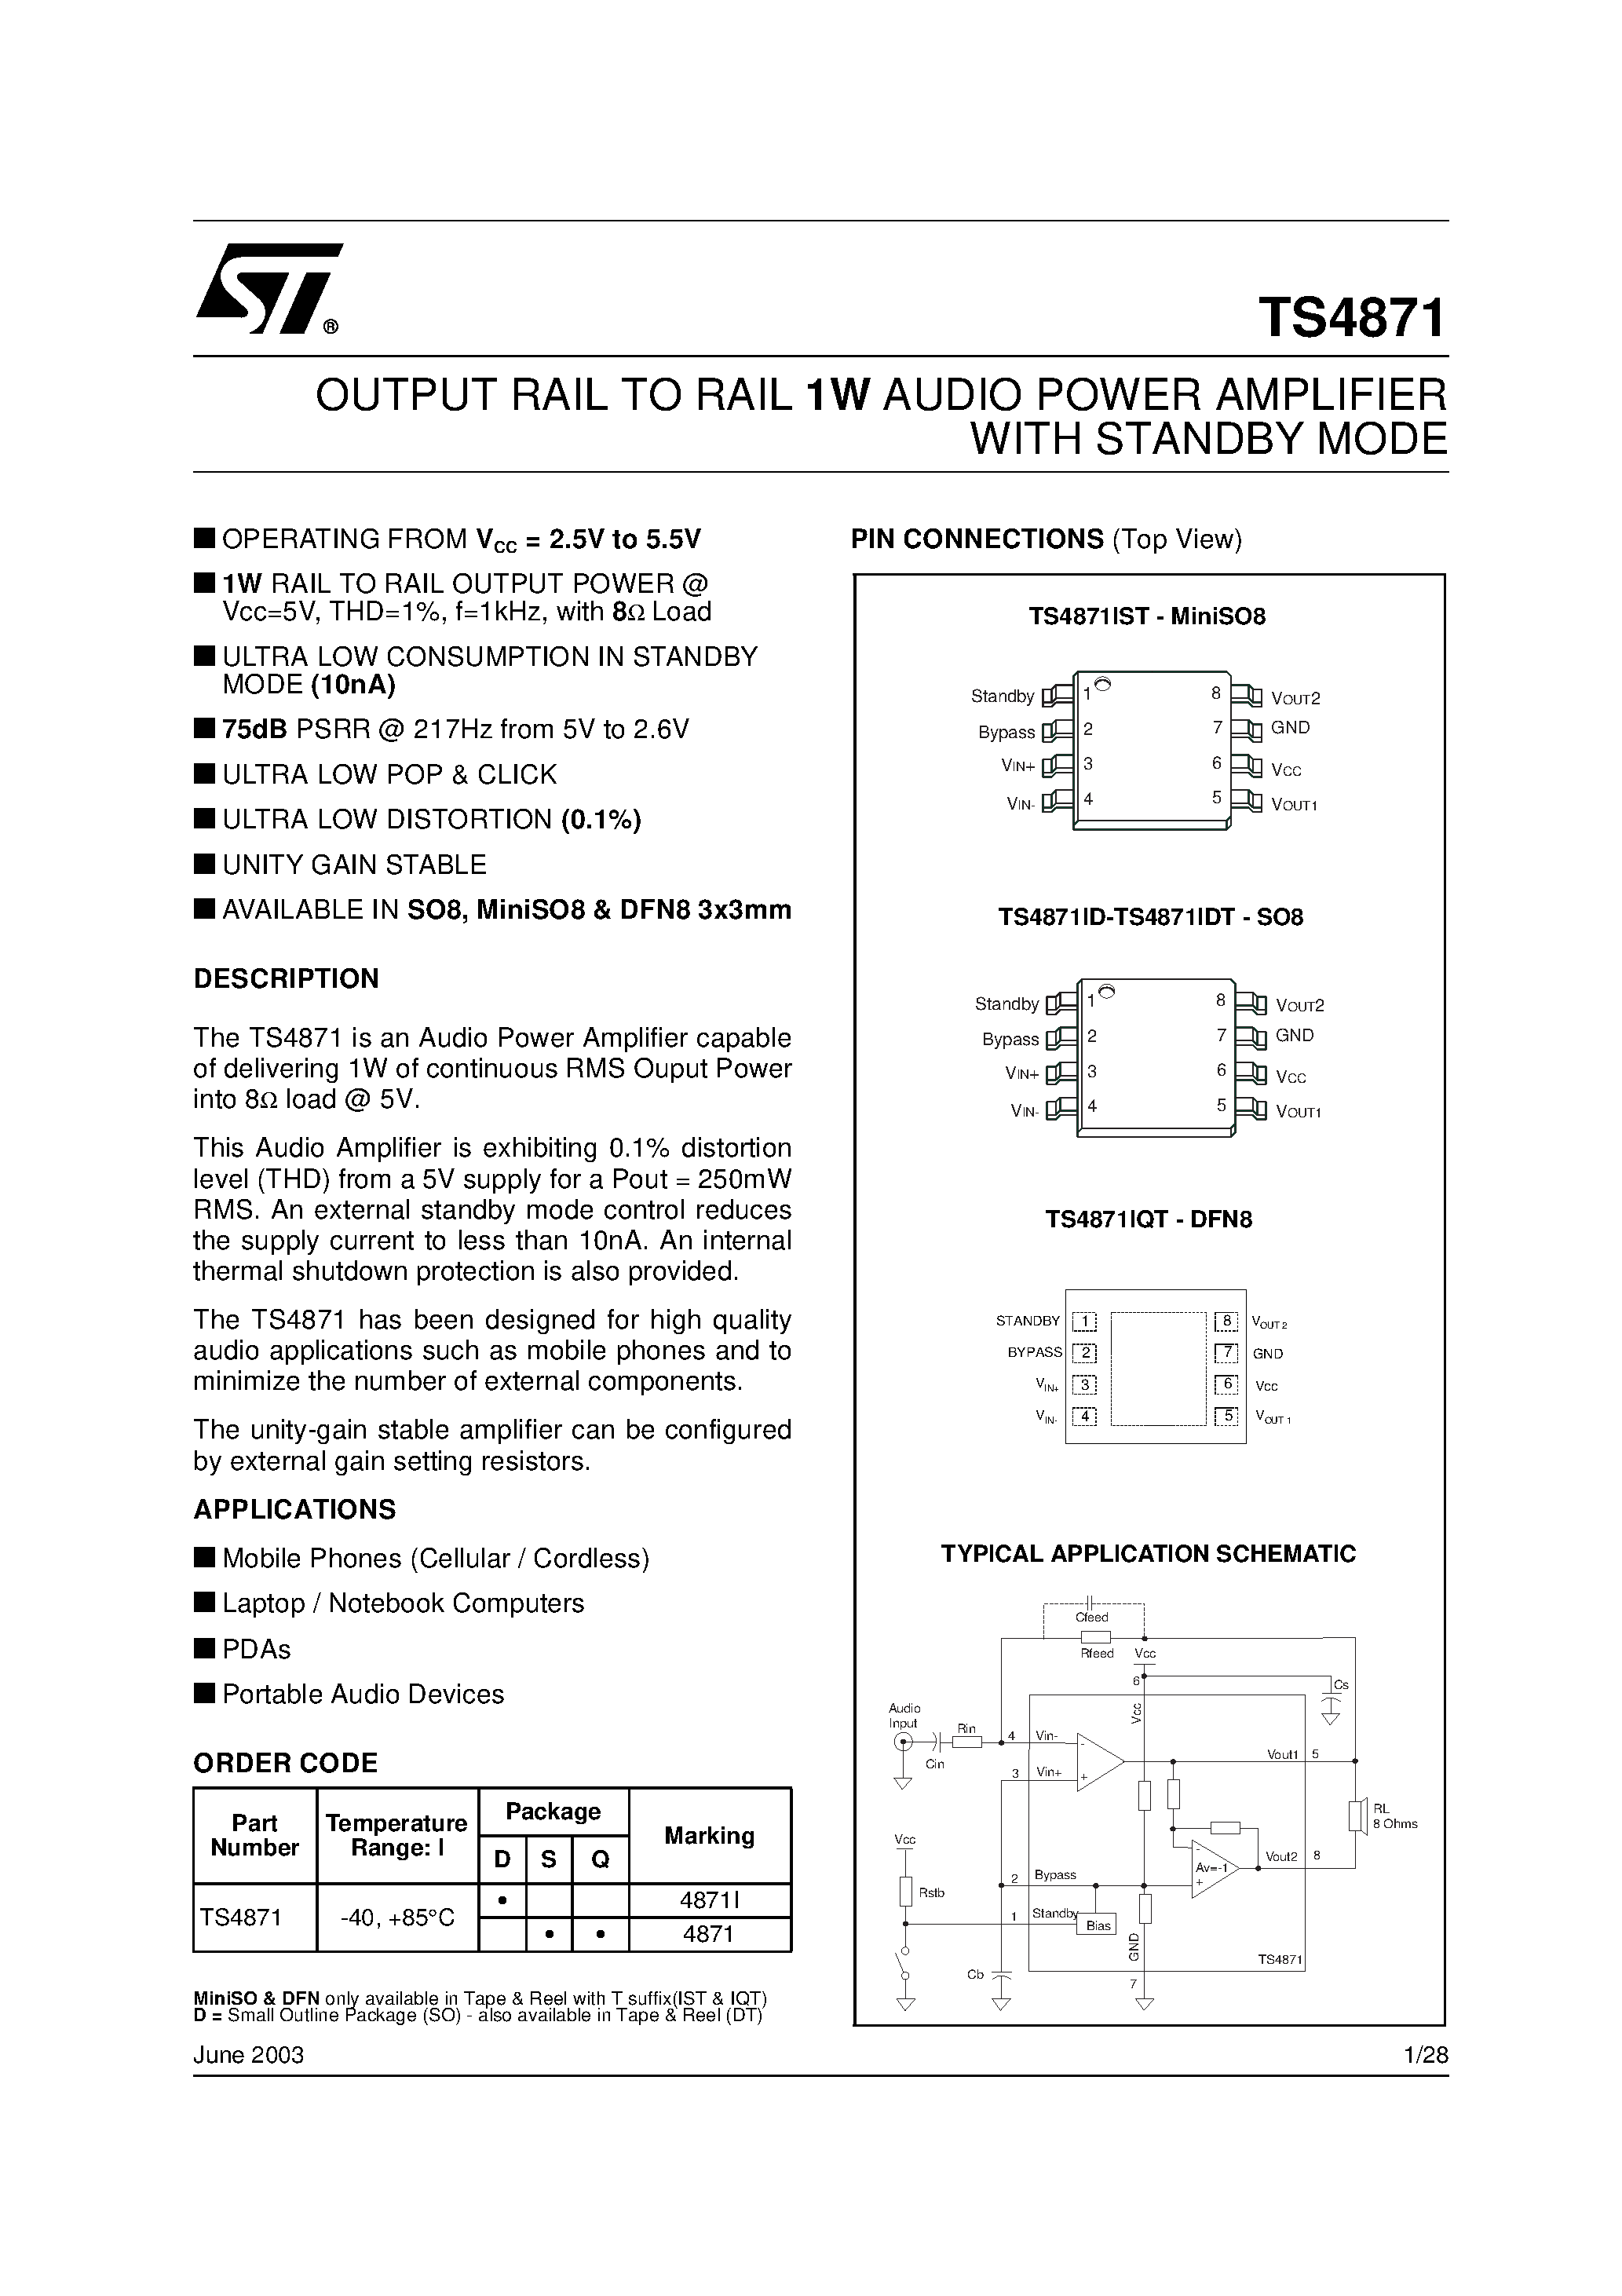 Даташит TS4871 - OUTPUT RAIL TO RAIL 1W AUDIO POWER AMPLIFIER WITH STANDBY MODE страница 1